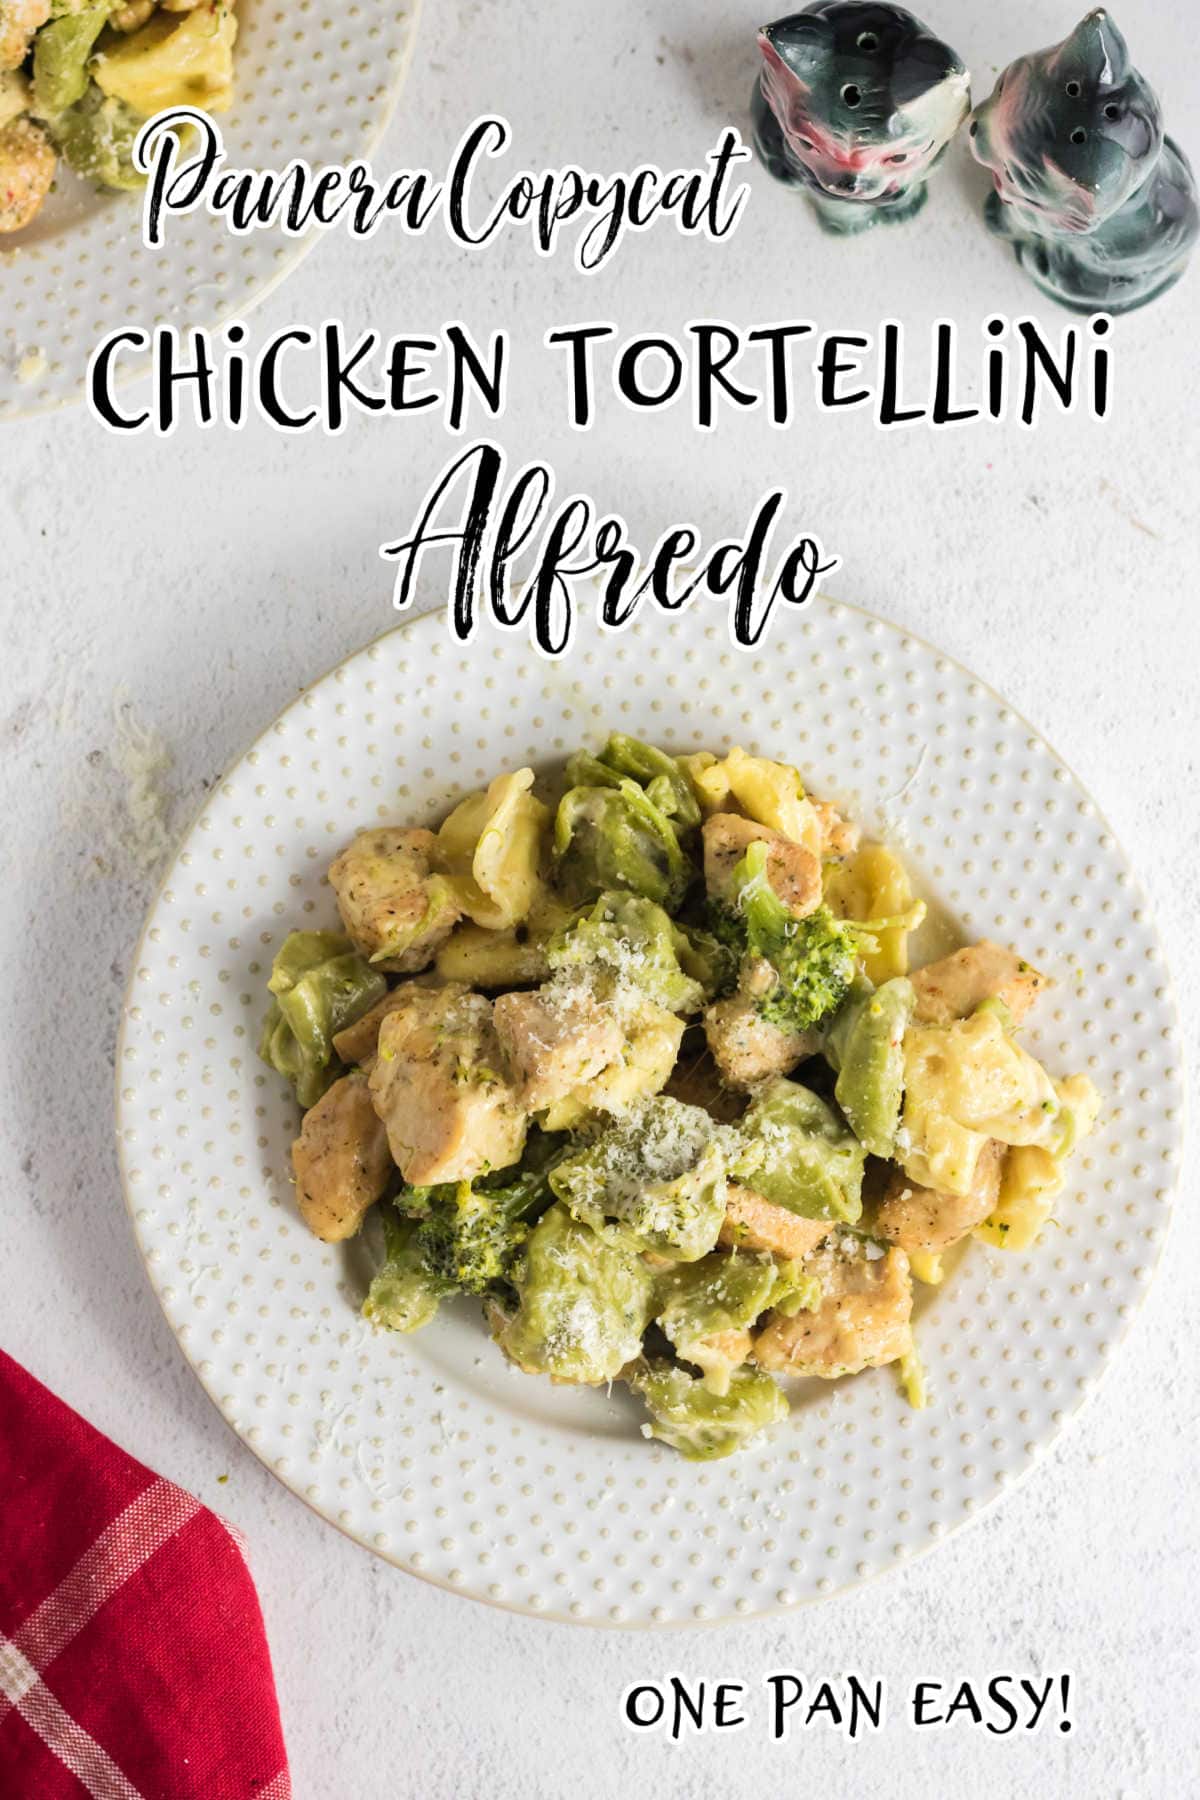 Overhead view of tortellini with a title text overlay.